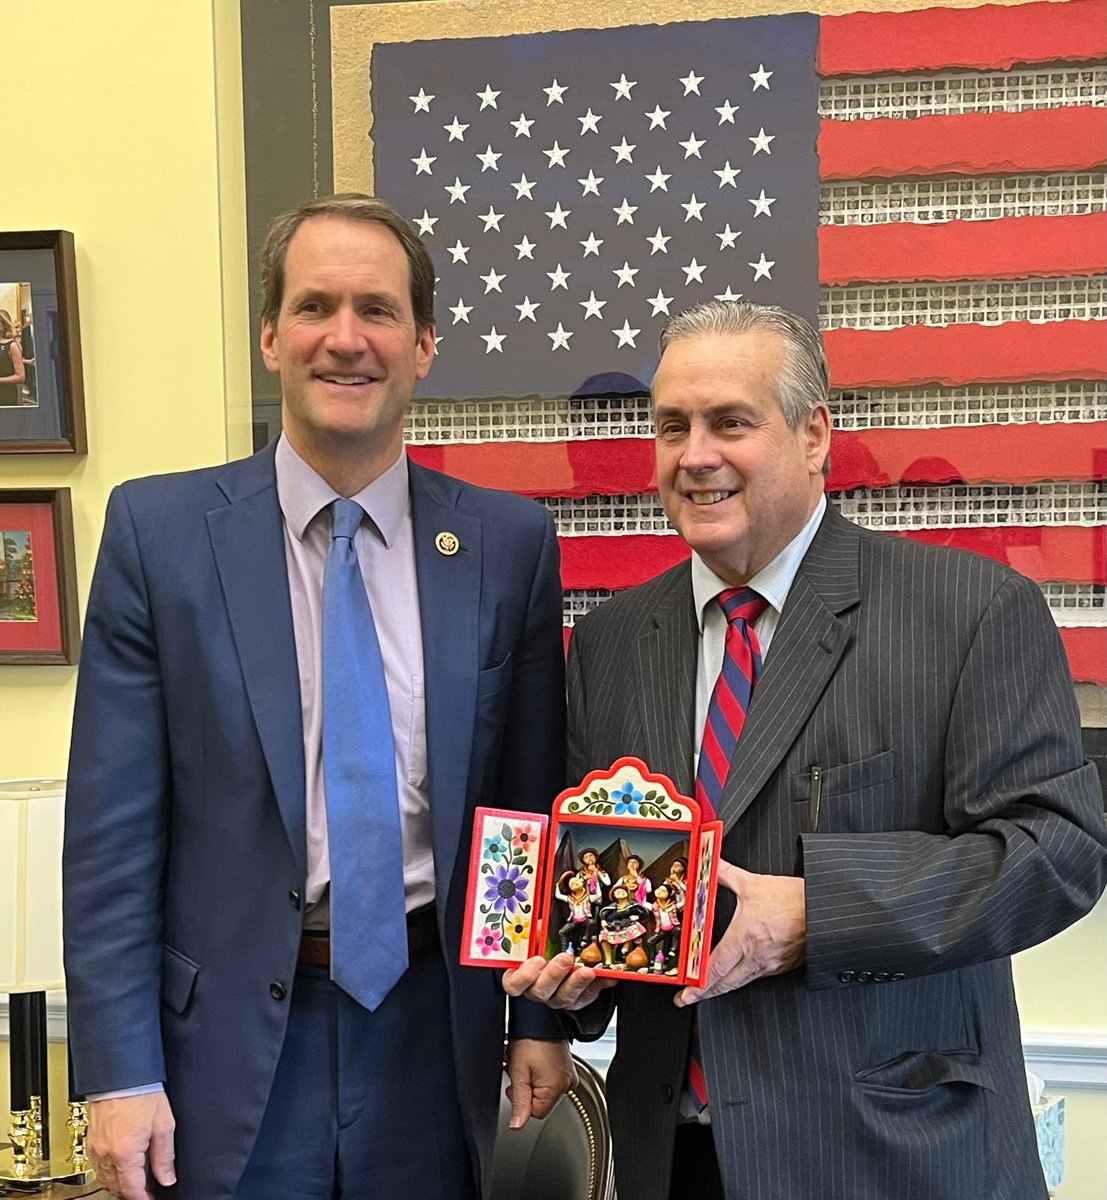 @PeruIntheUS Ambassador @alredroferrerod and Peru-born US Congressman @jahimes held a fruitful meeting. They delved into crucial aspects of the Peru-US partnership, such as the bilateral free trade agreement, security matters, and the highly anticipated APEC Summit 2024 @apecperu